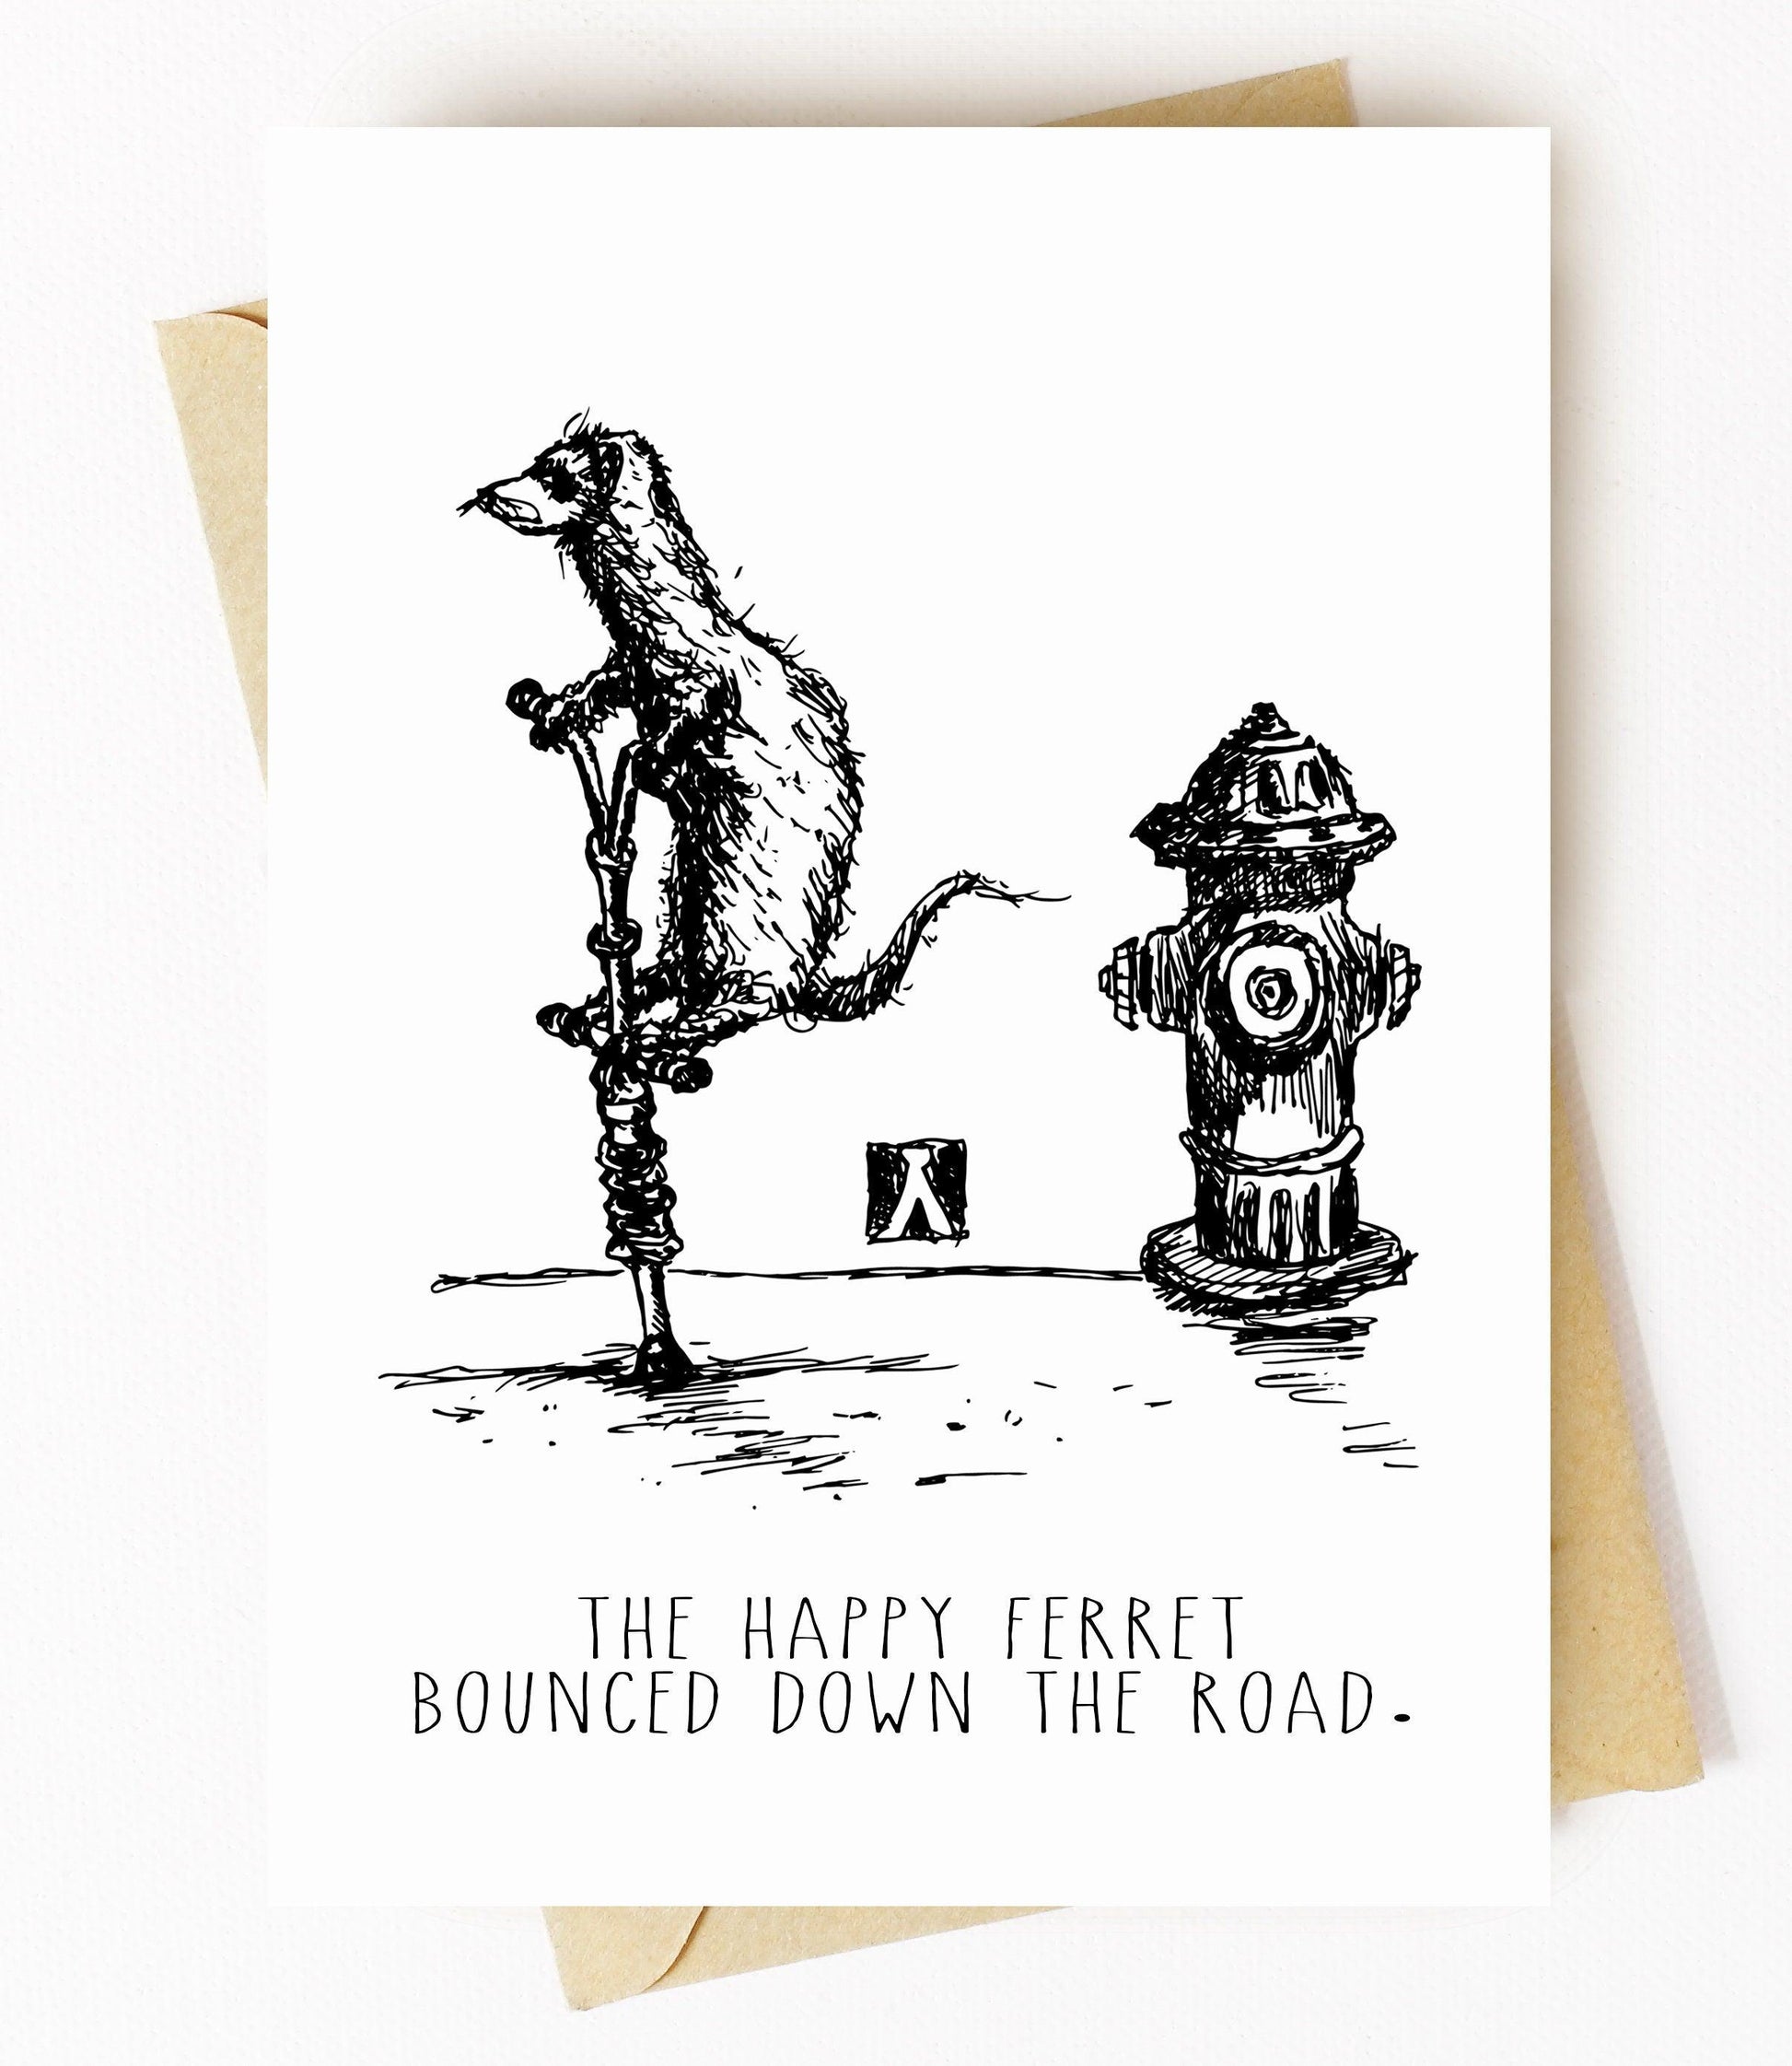 BellavanceInk: Greeting Card With Graphic Drawing of A Ferret Weasel On A Pogo Stick 5 x 7 Inches - BellavanceInk